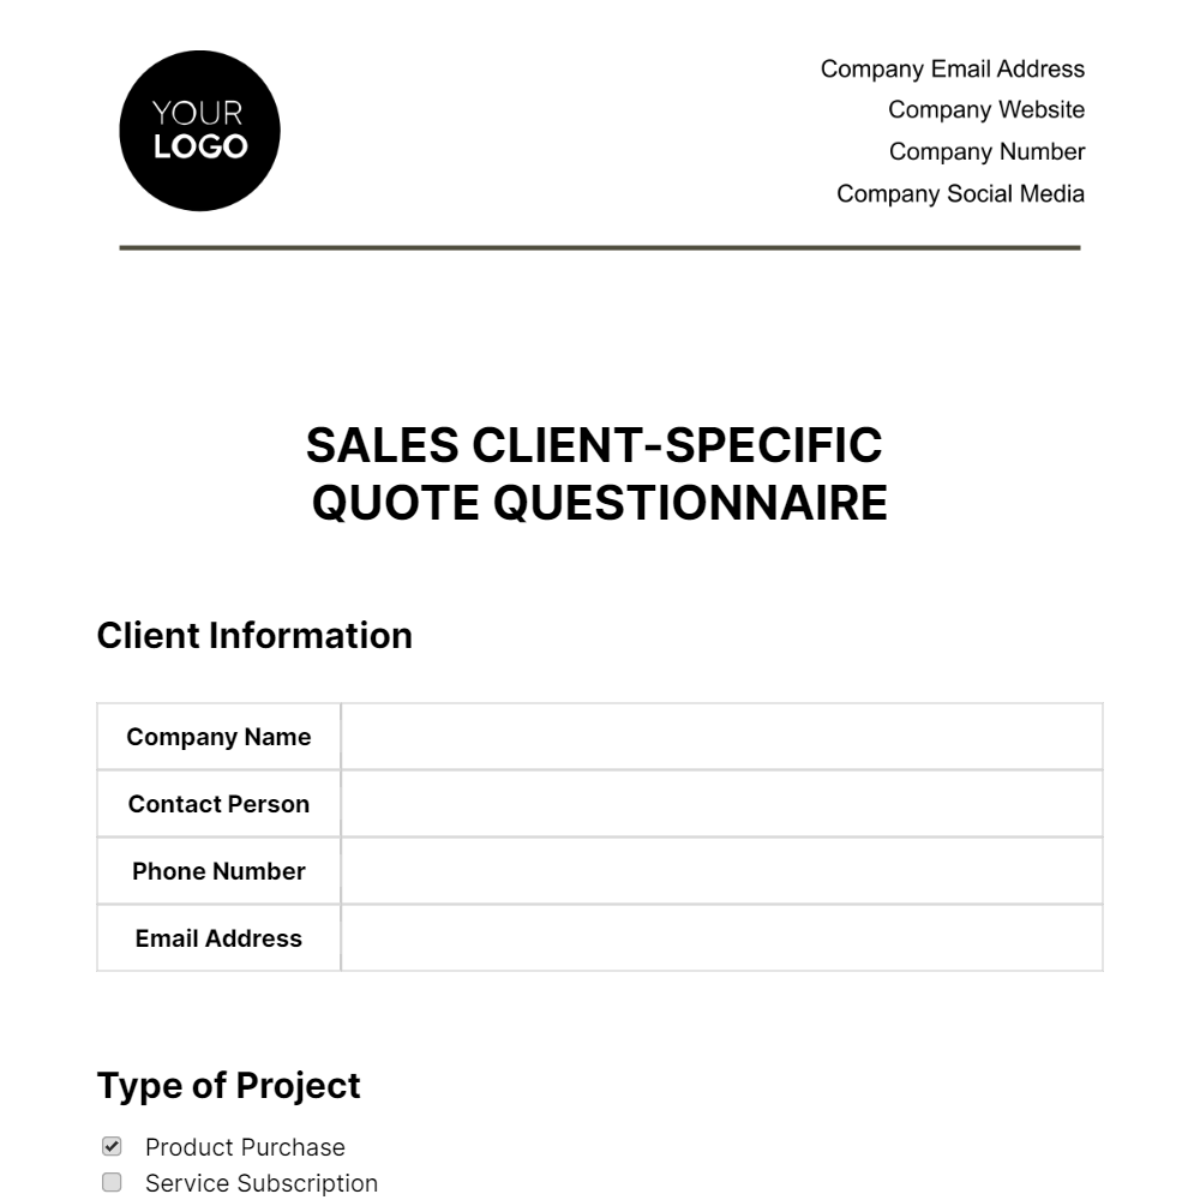 Free Sales Client-specific Quote Questionnaire Template